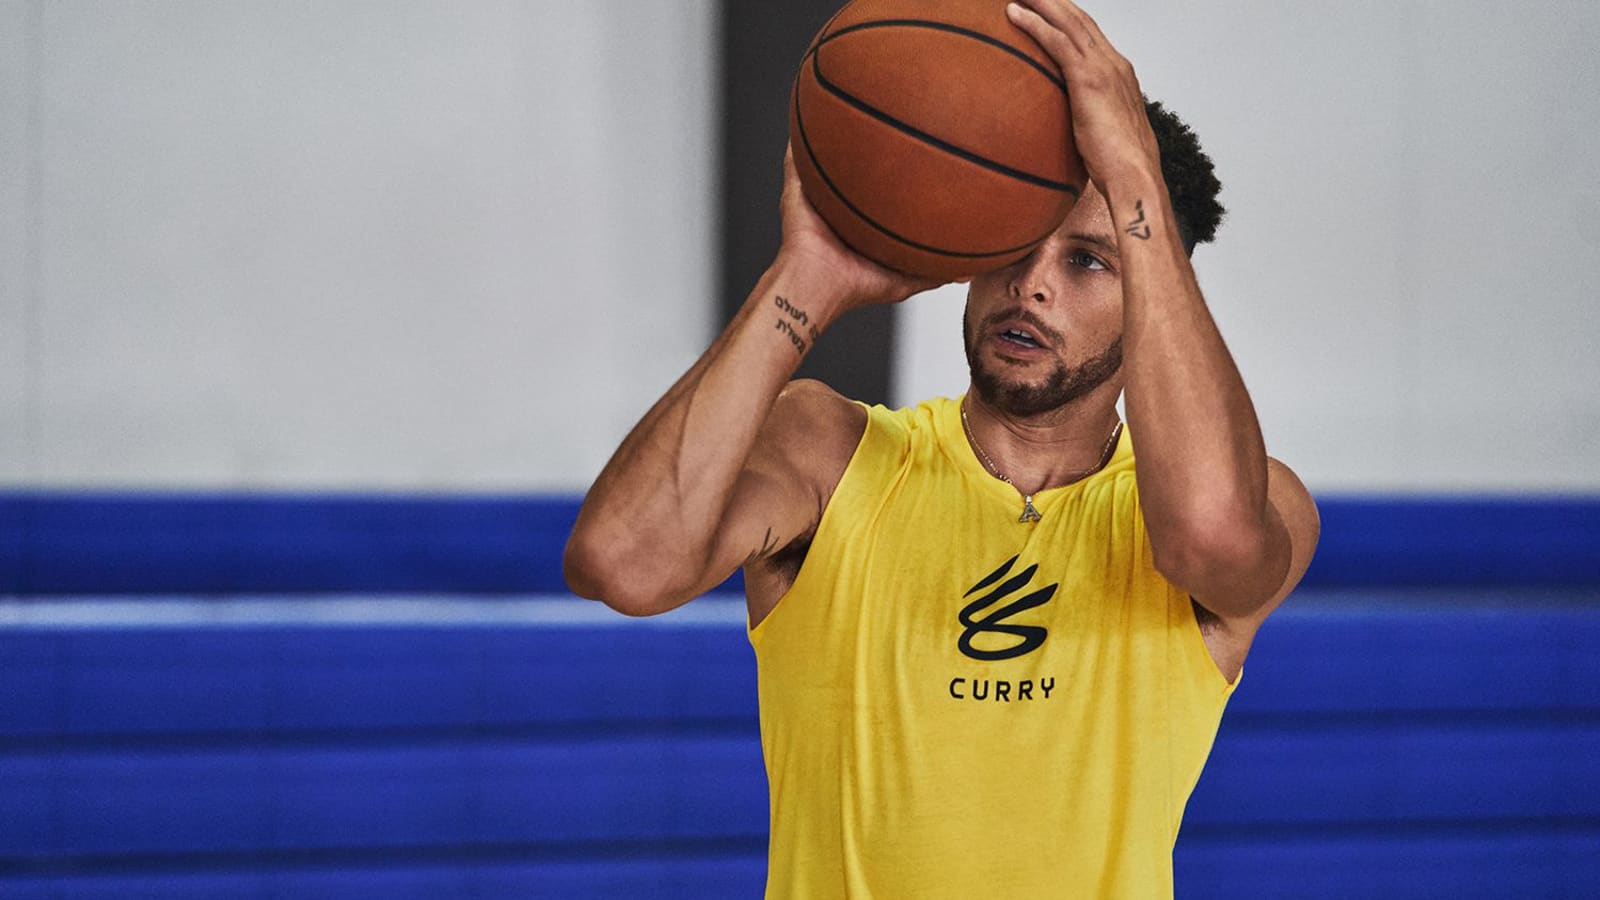 Under Armour launches a brand with NBA star Steph Curry